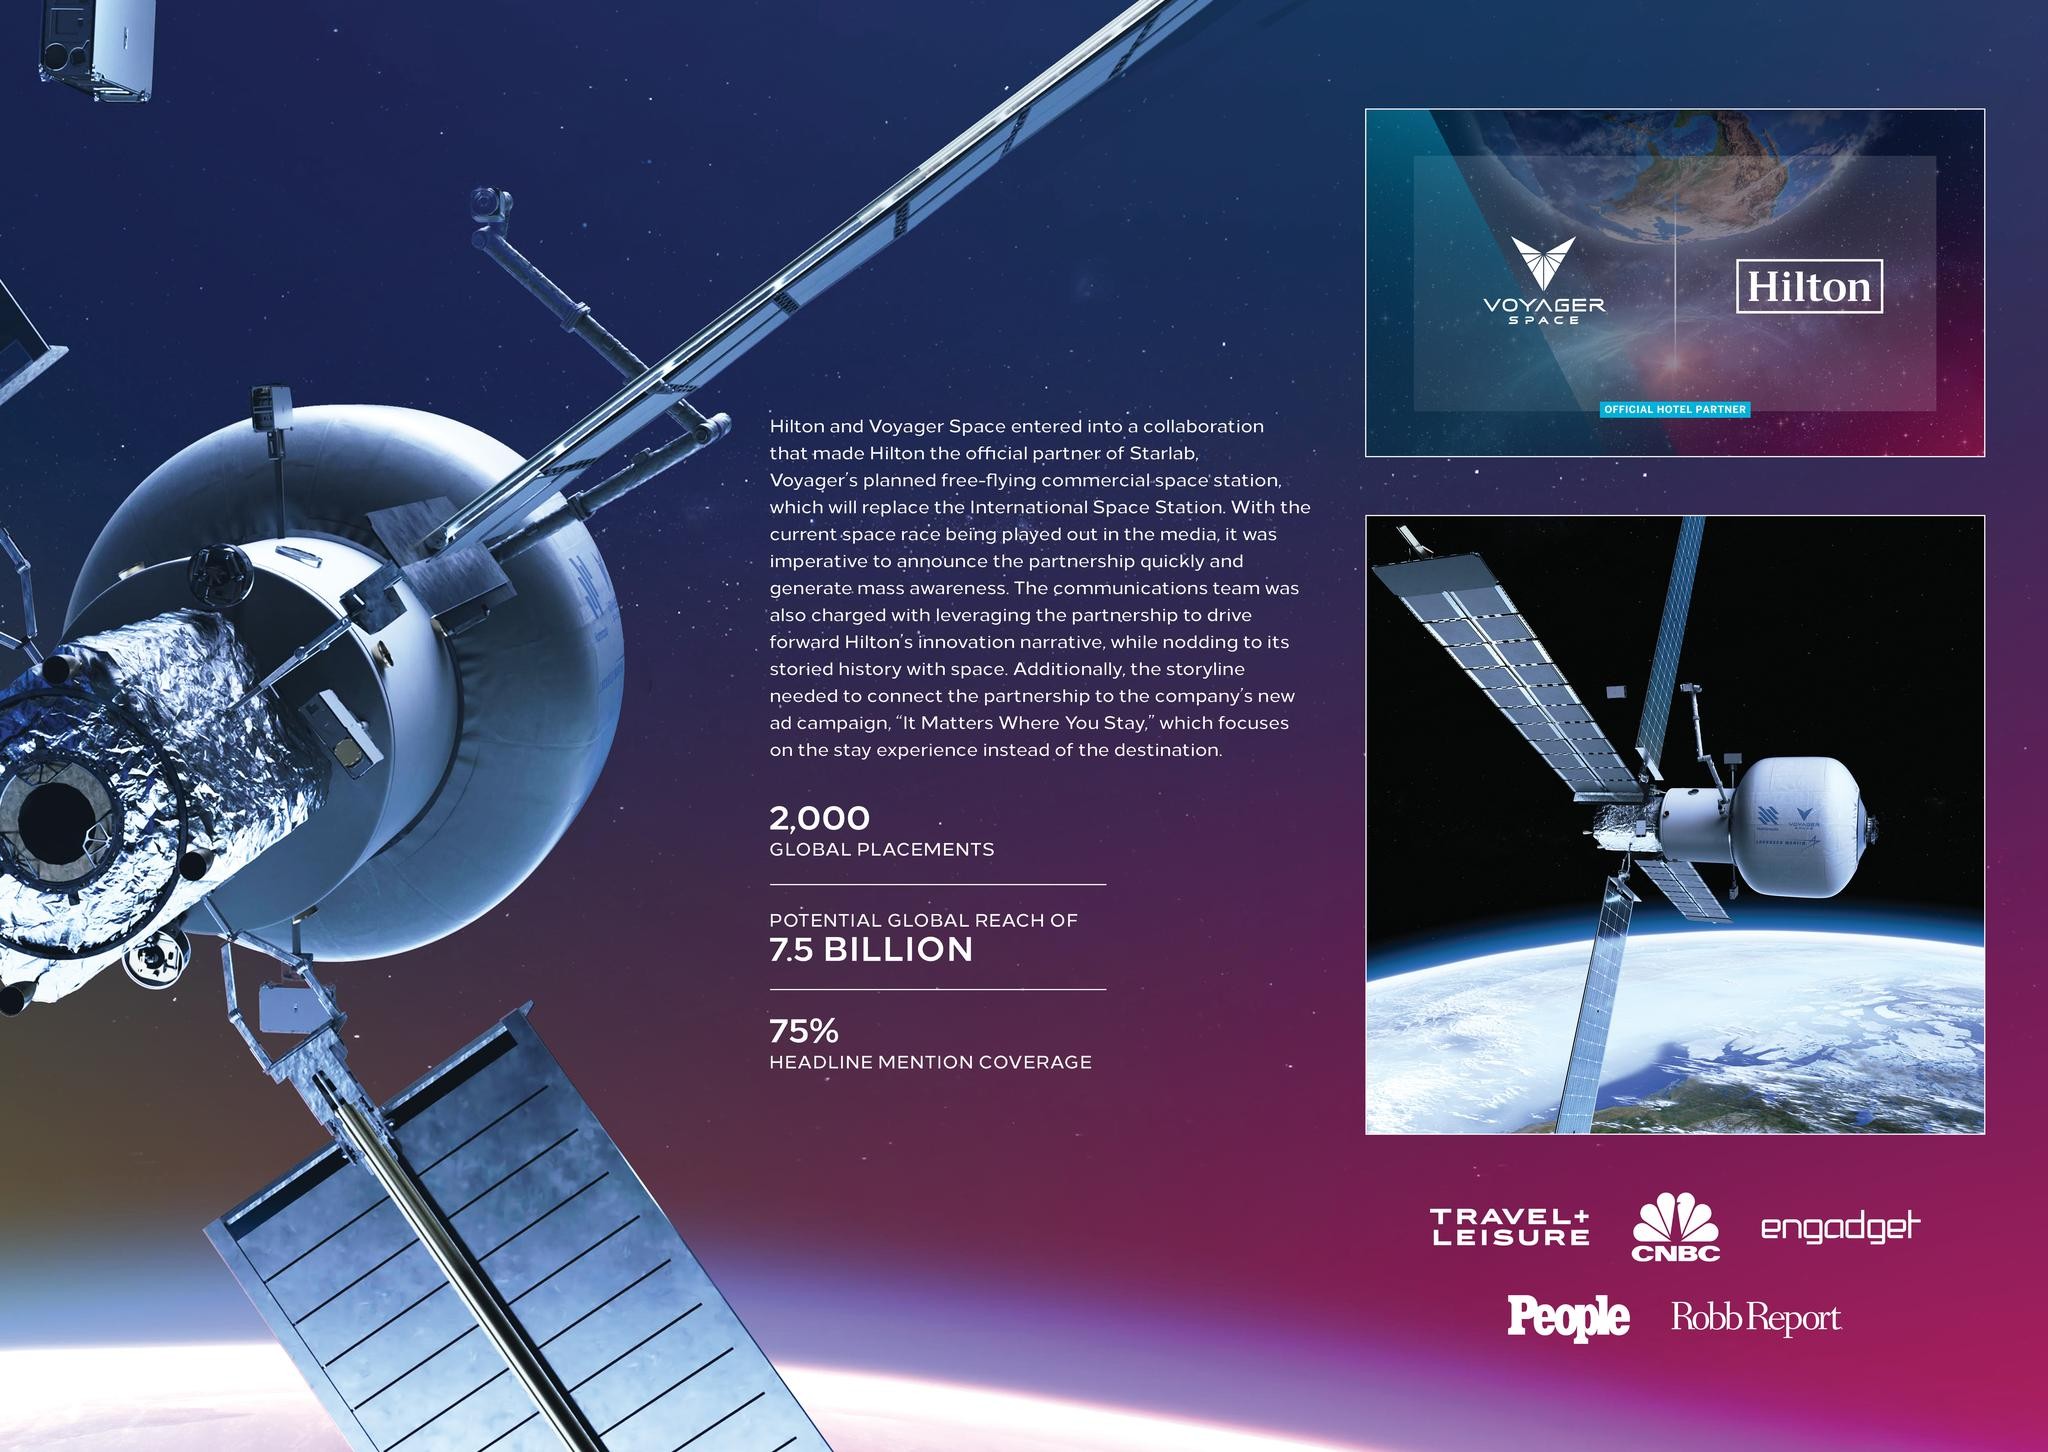 Hilton and Voyager Space Announce Out-of-this-World Stay Experience